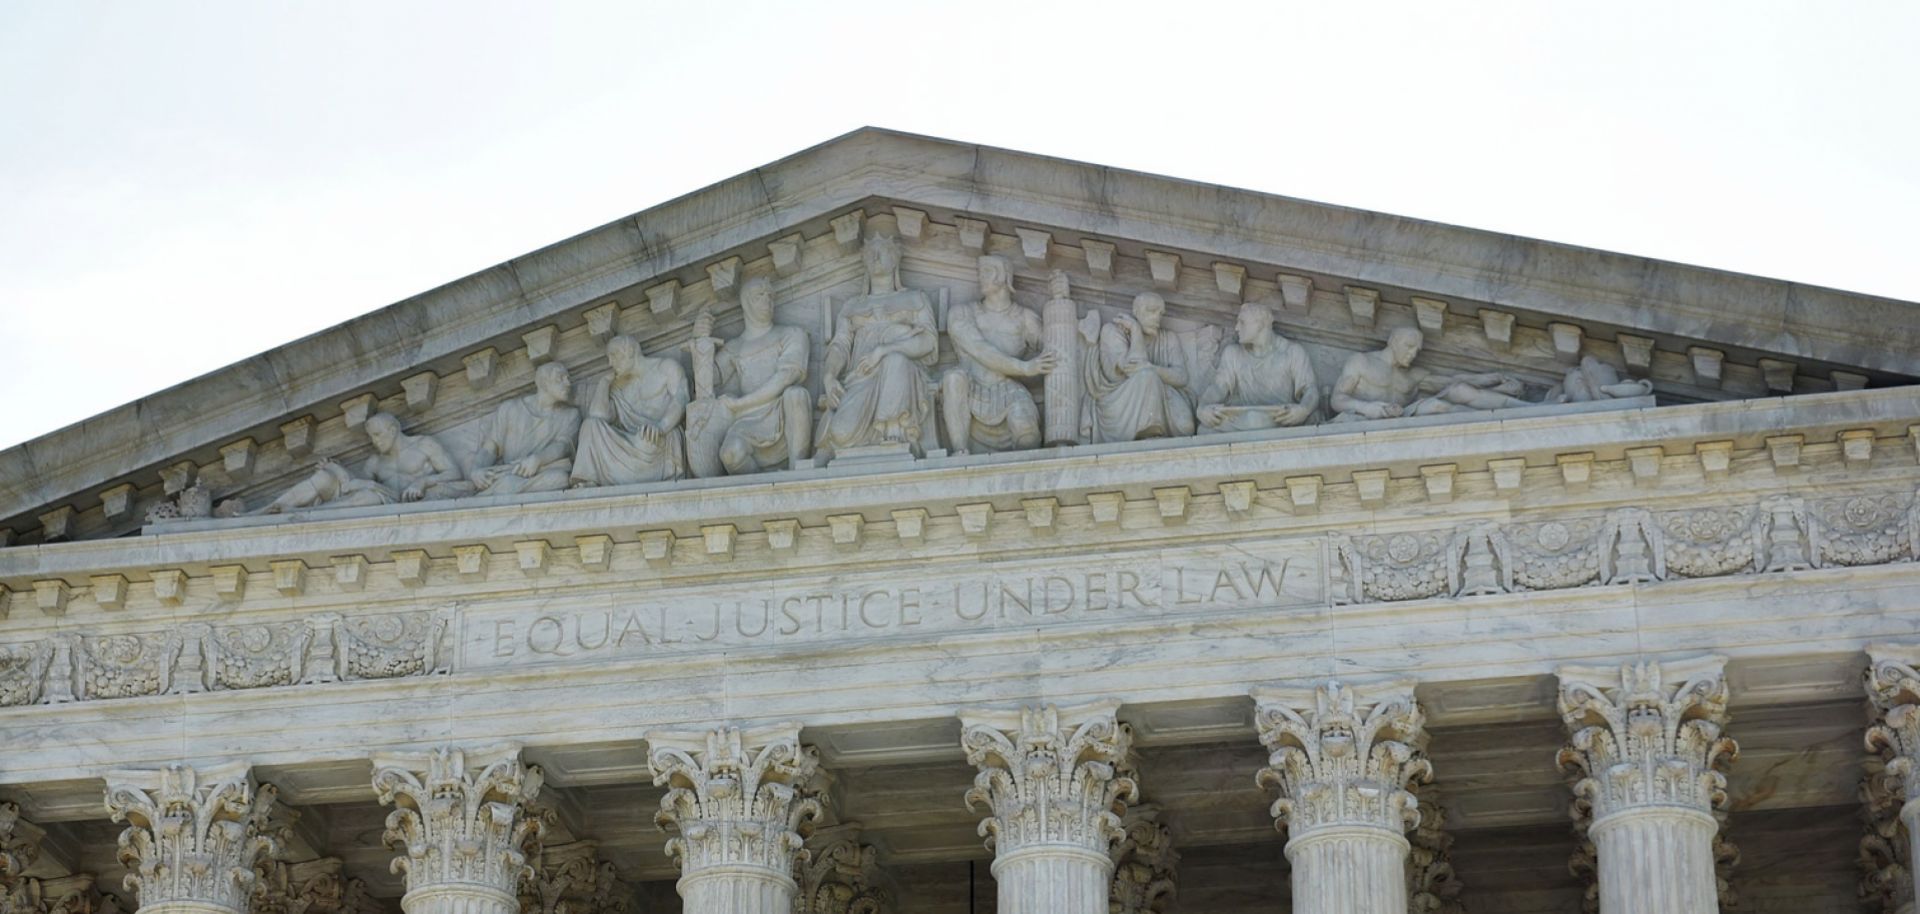 The Supreme Court's most recent term provides some interesting insight into the judiciary's functions in the market state era.